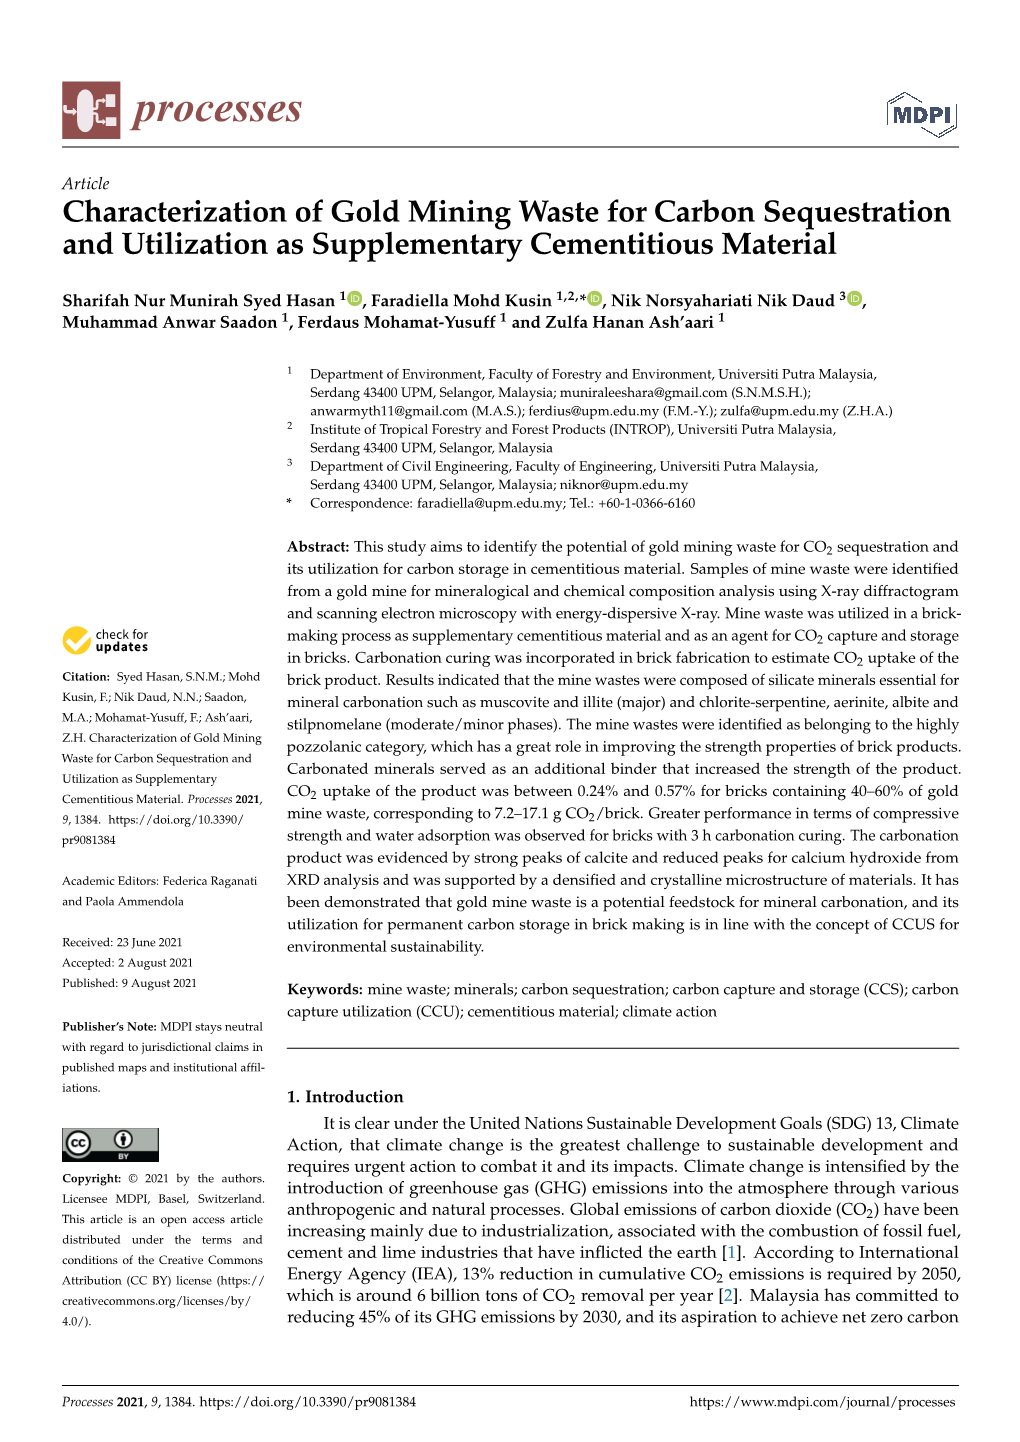 Characterization of Gold Mining Waste for Carbon Sequestration and Utilization As Supplementary Cementitious Material